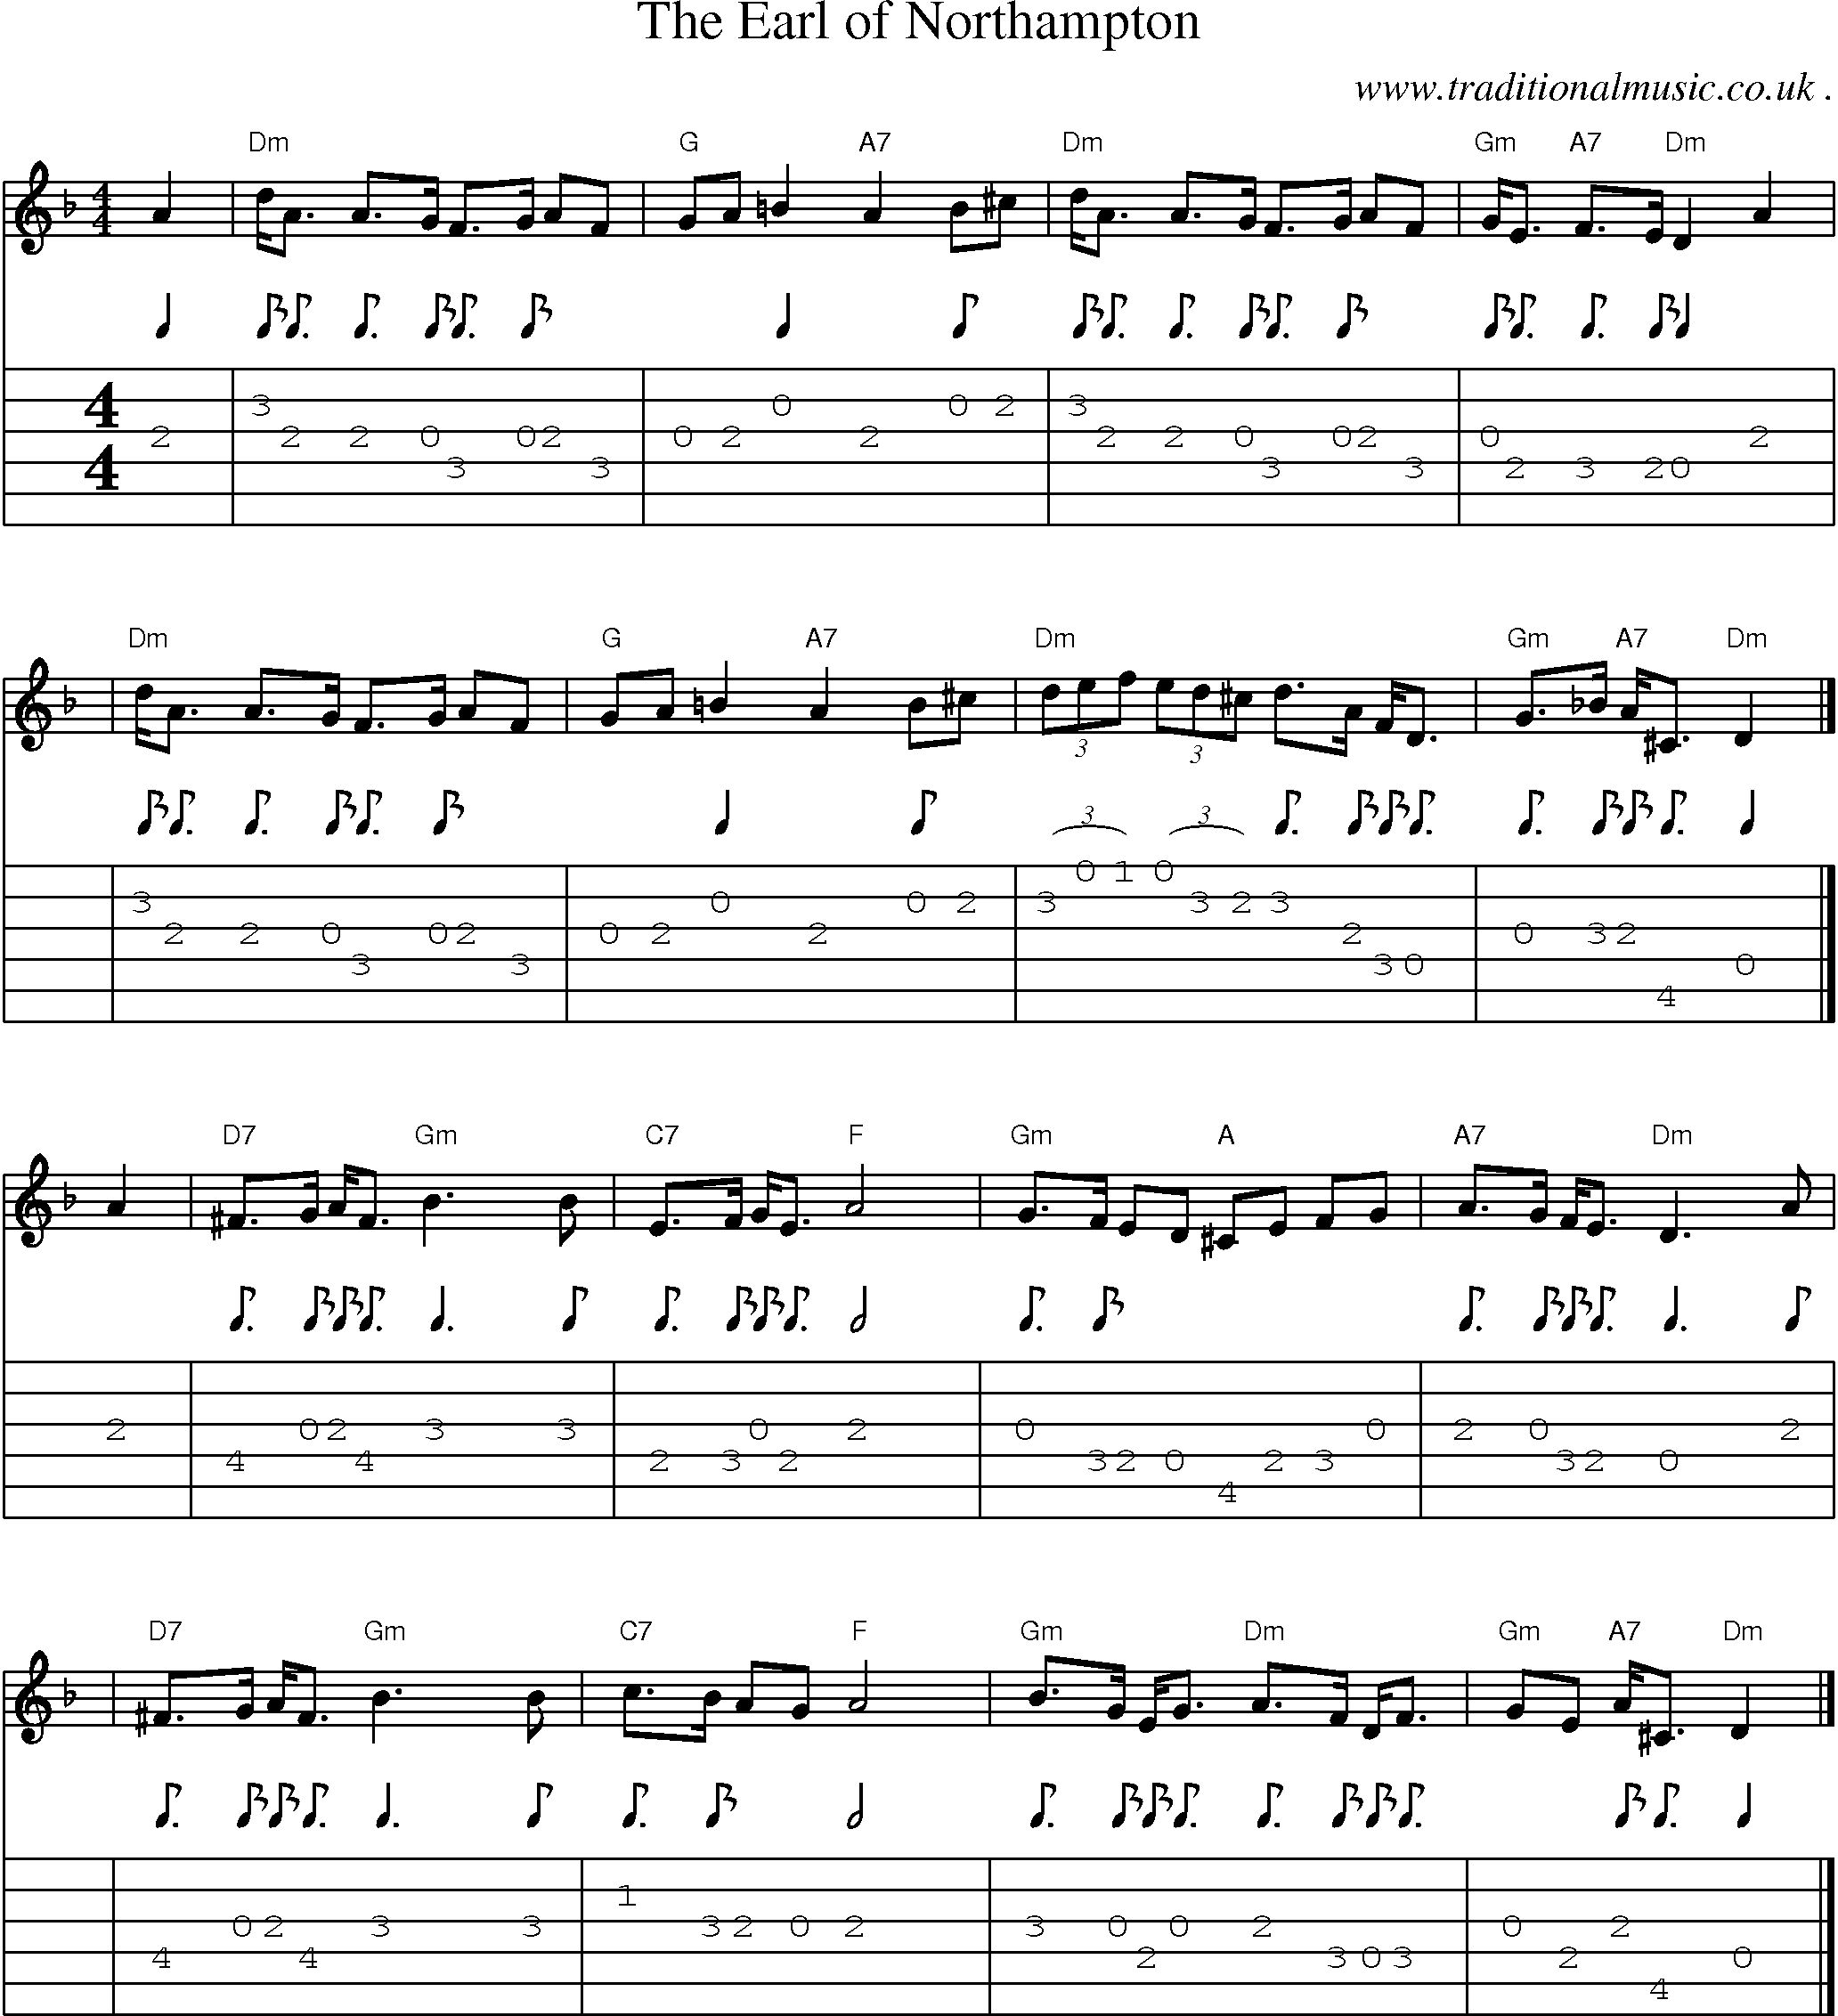 Sheet-music  score, Chords and Guitar Tabs for The Earl Of Northampton